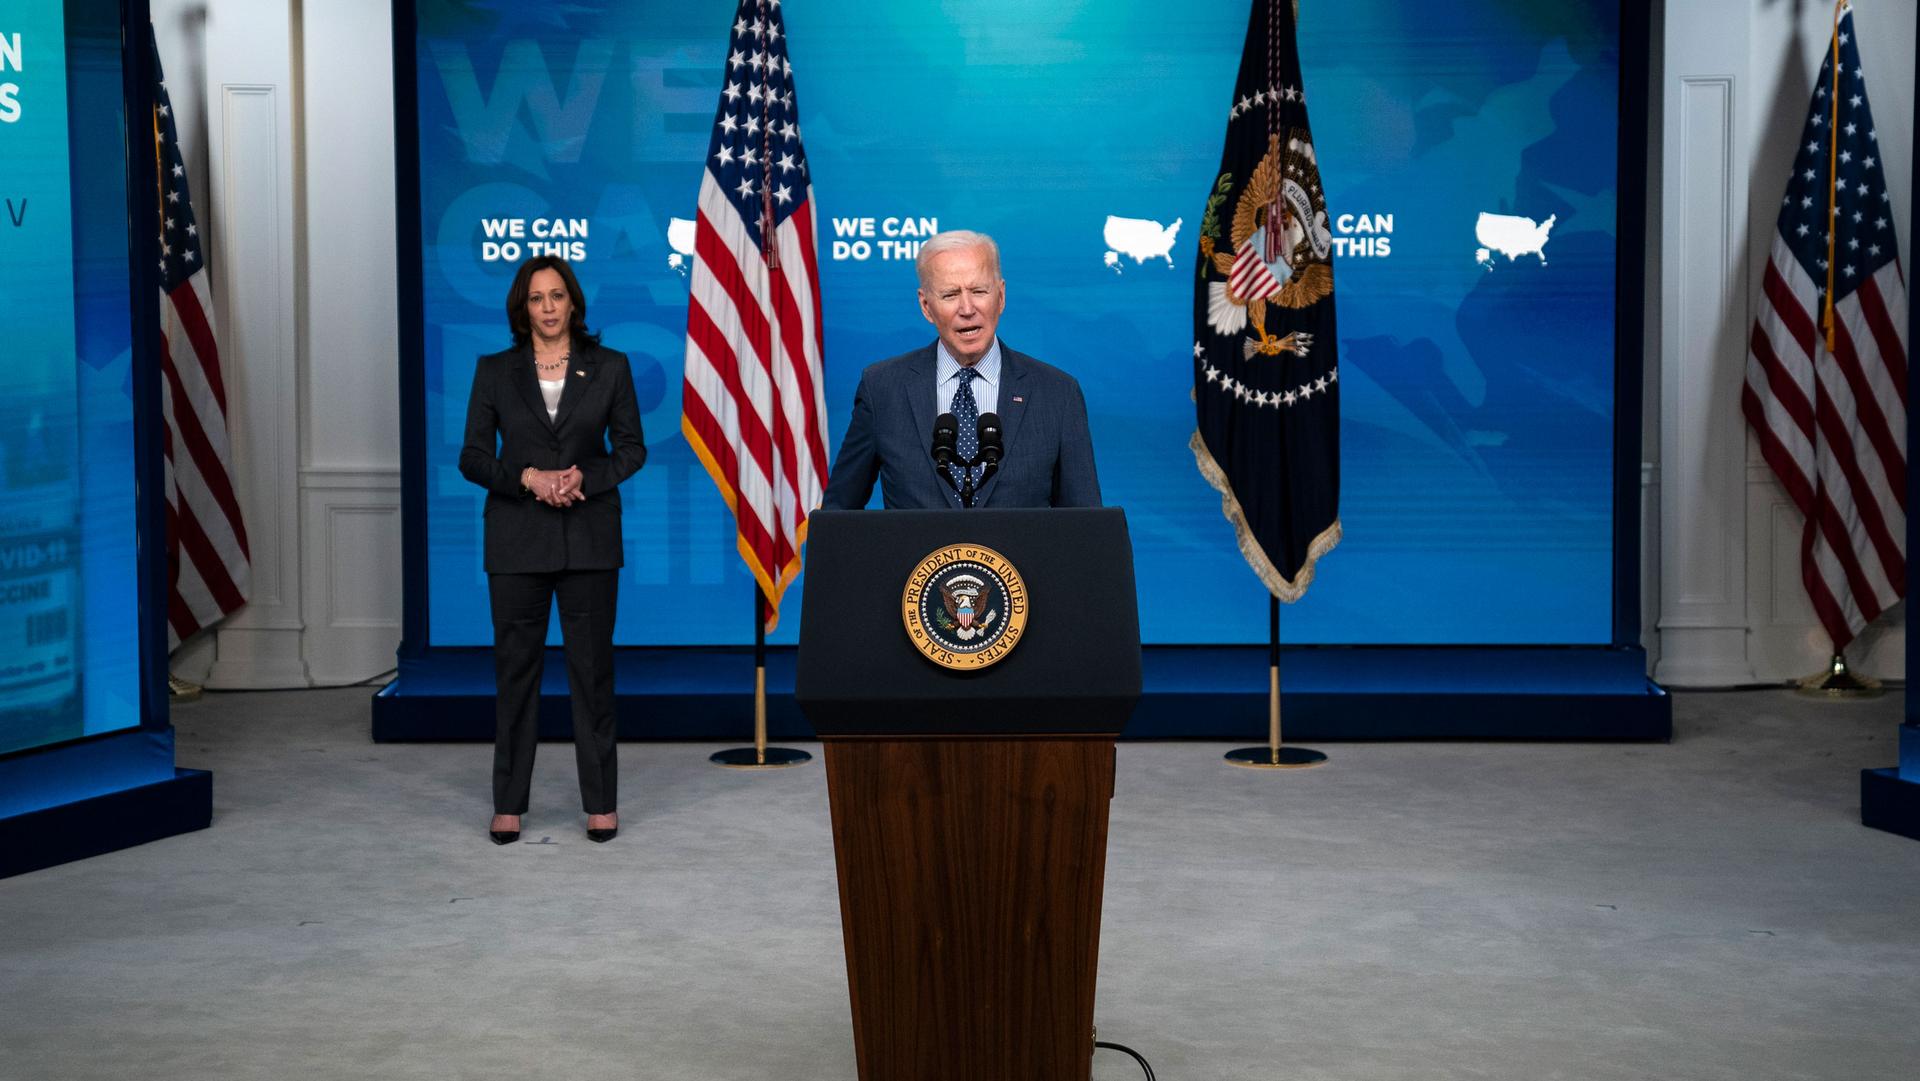 Vice President Kamala Harris is shown standing several feet behind President Joe Biden who is standing at a wooden podium.